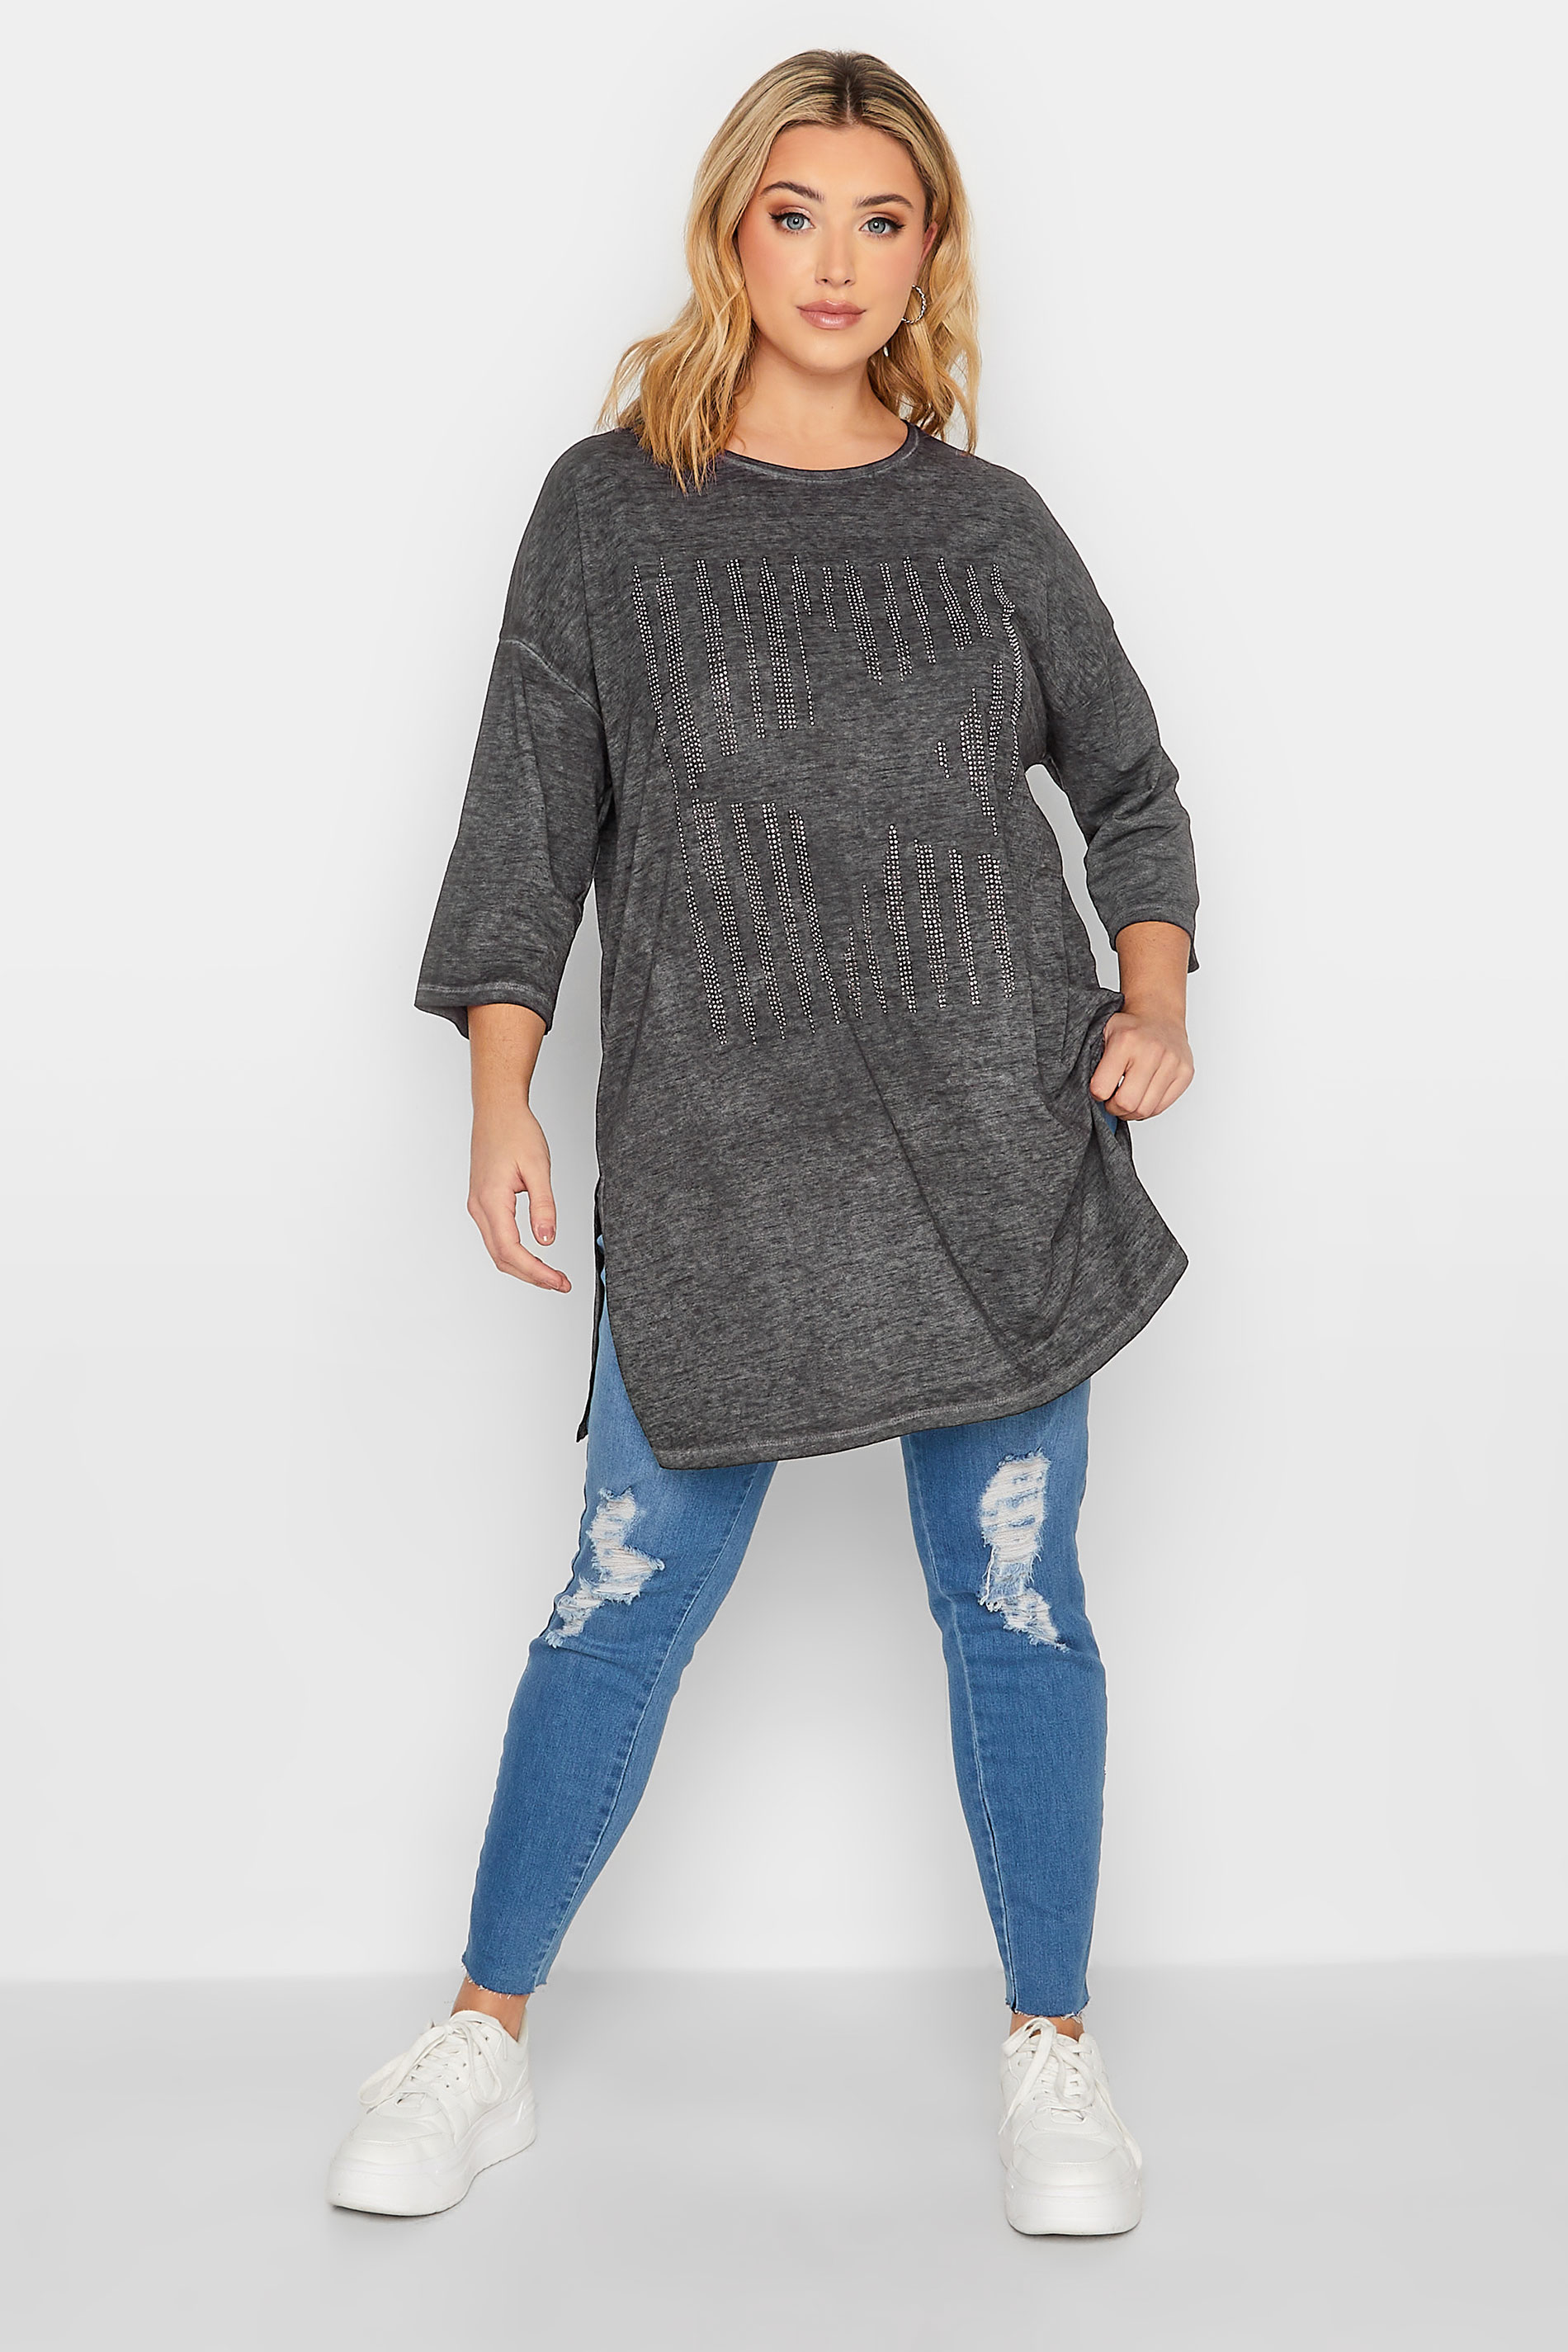 Plus Size Grey Marl Stud Star T-Shirt | Yours Clothing 2